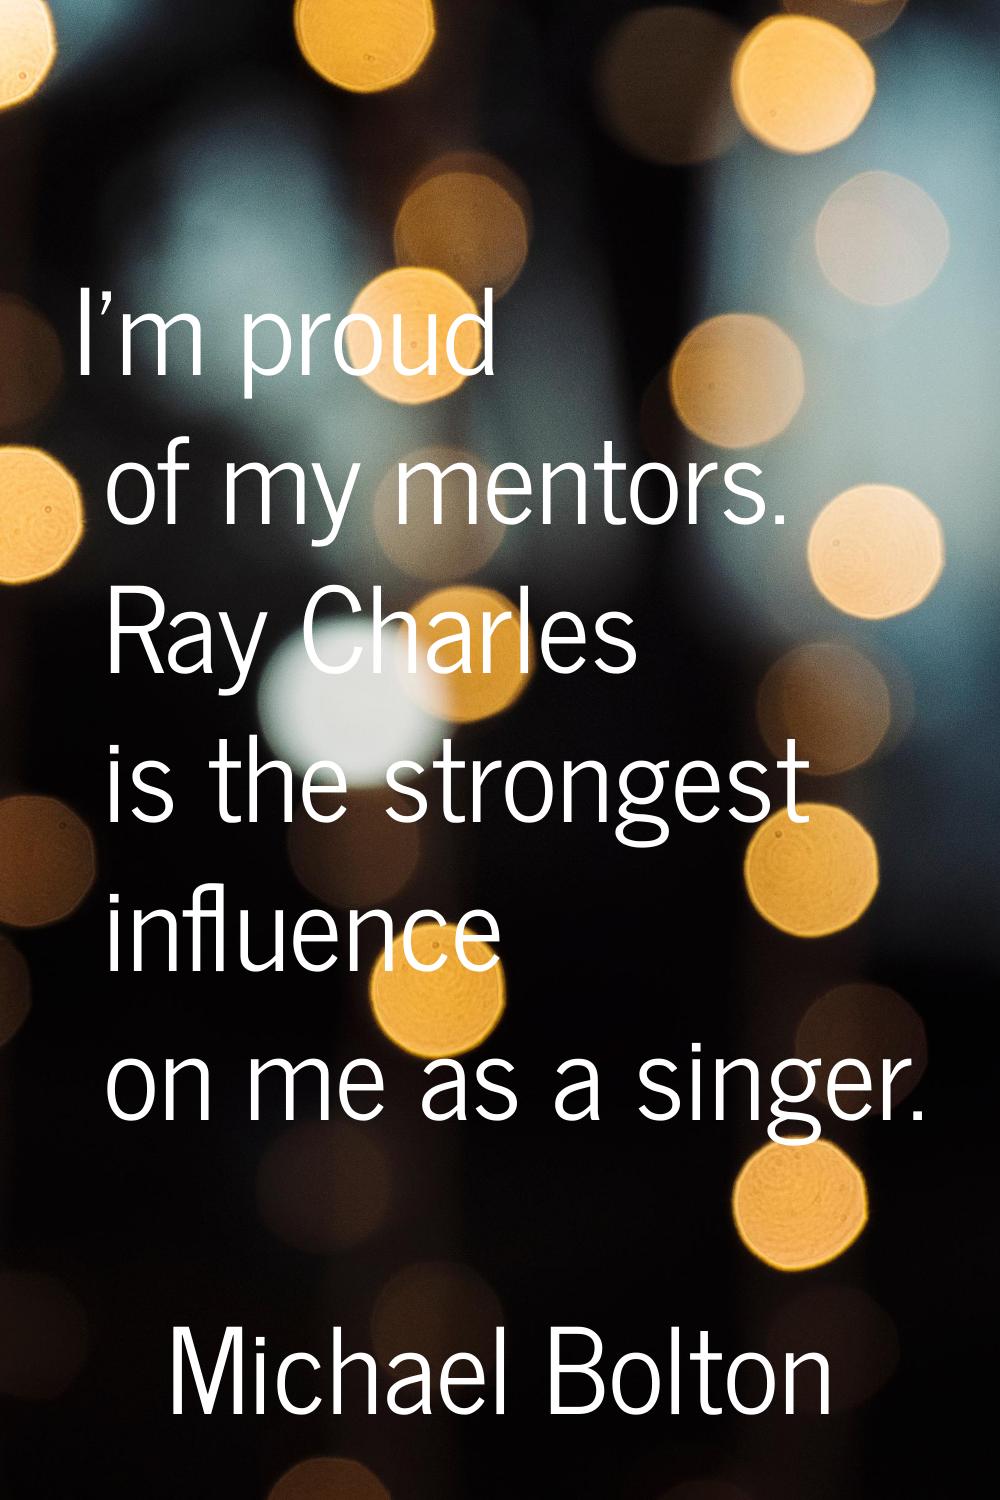 I'm proud of my mentors. Ray Charles is the strongest influence on me as a singer.